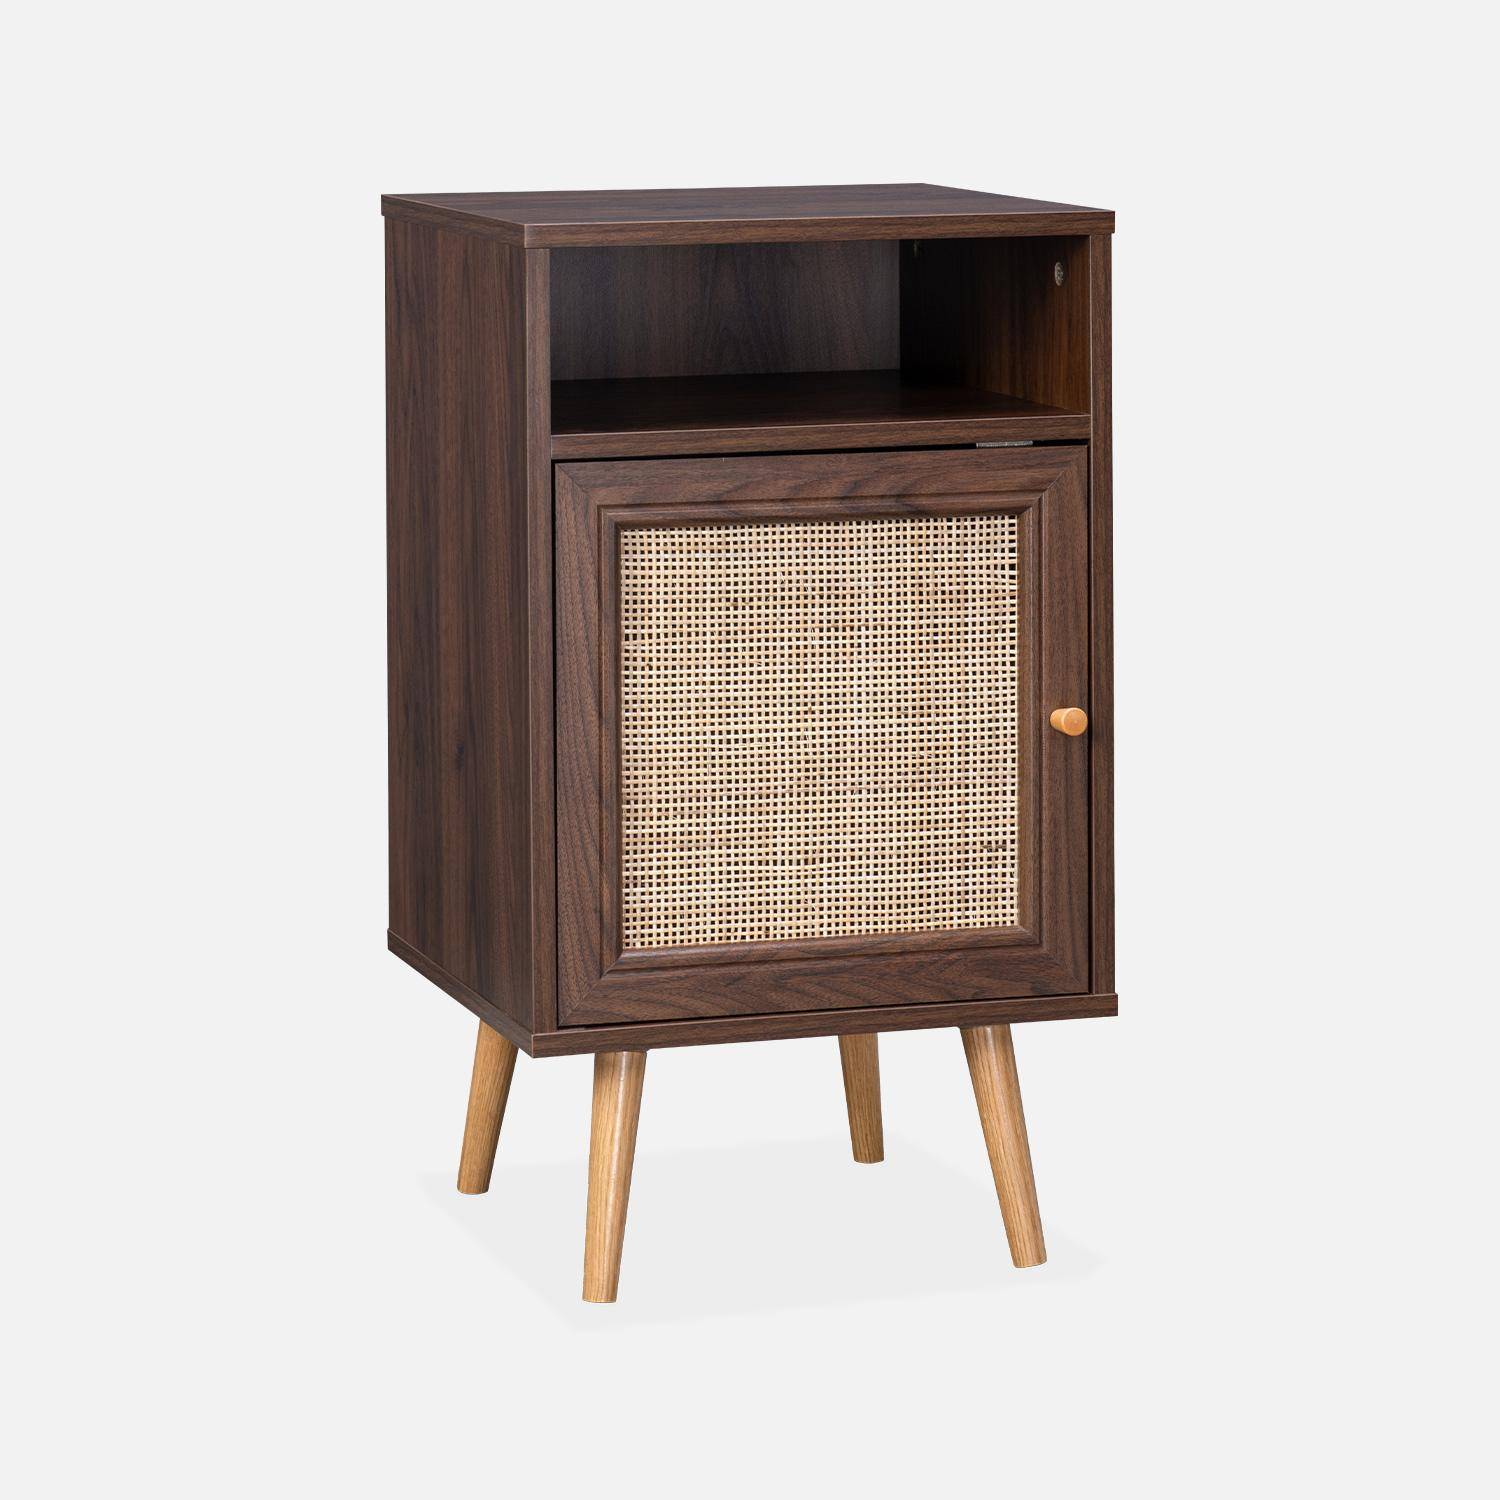 Pair of Scandi-style wood and cane rattan bedside tables with cupboard, 40x39x70cm - Boheme - Dark Wood colour,sweeek,Photo5